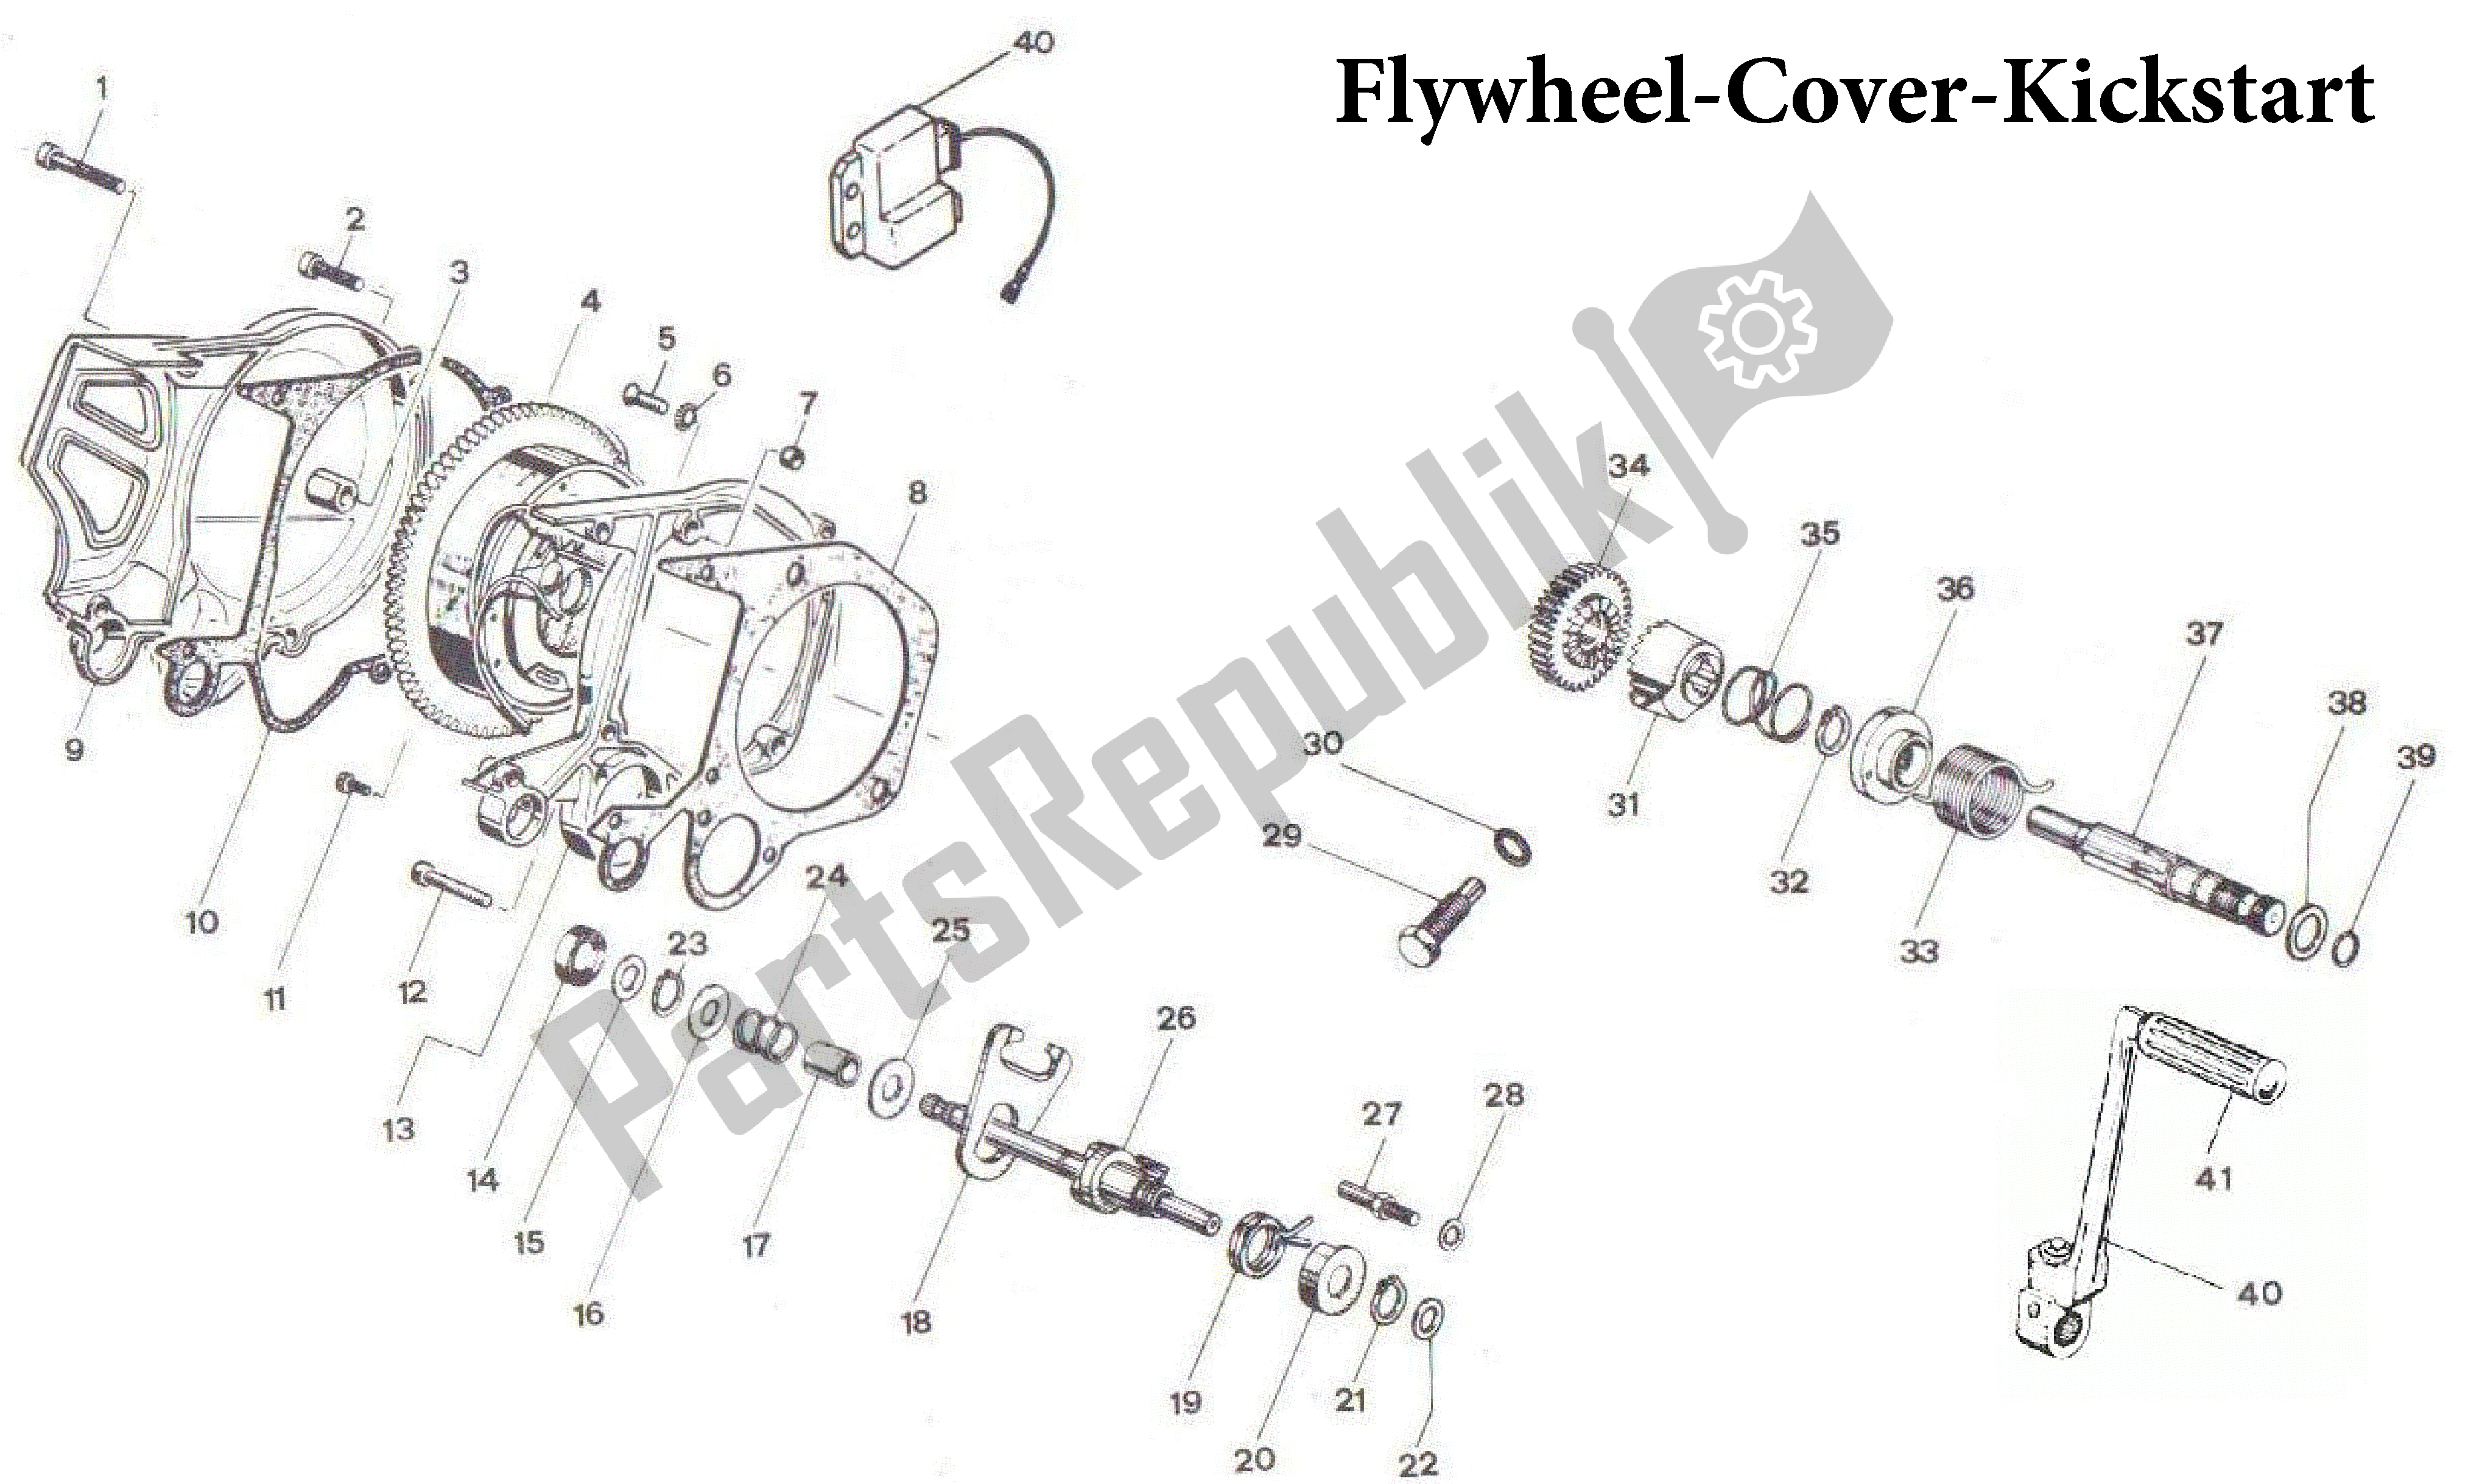 All parts for the Flywheel-cover-kickstart of the Aprilia Sonic 50 1998 - 2001